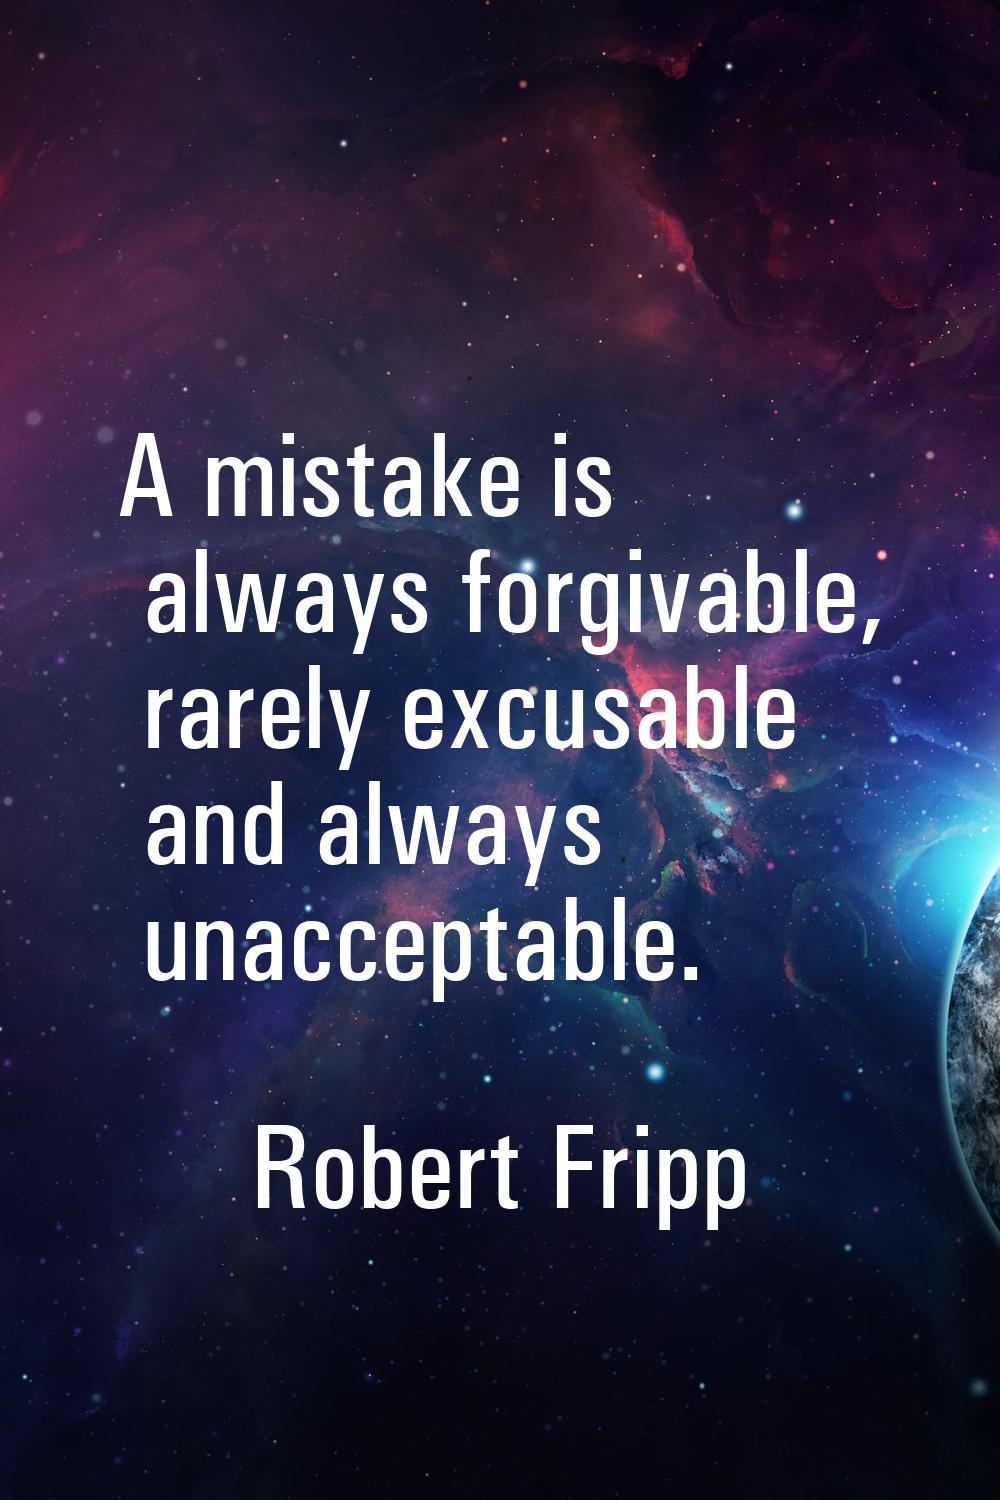 A mistake is always forgivable, rarely excusable and always unacceptable.